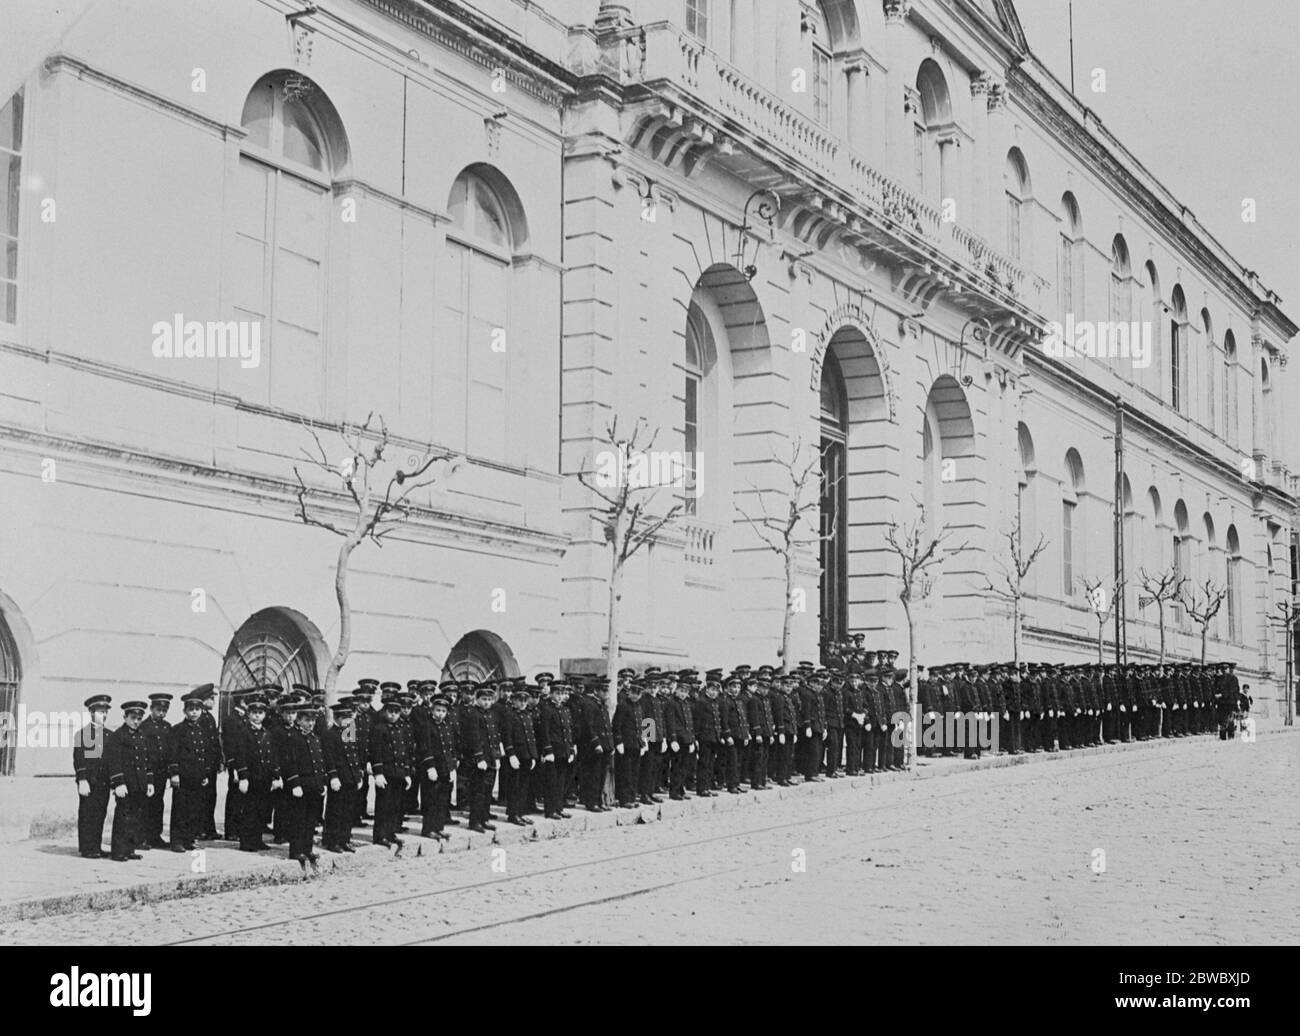 Prince of Wales to visit Naval school in Montevideo of Uruguay on August 15 30 July 1925 Stock Photo